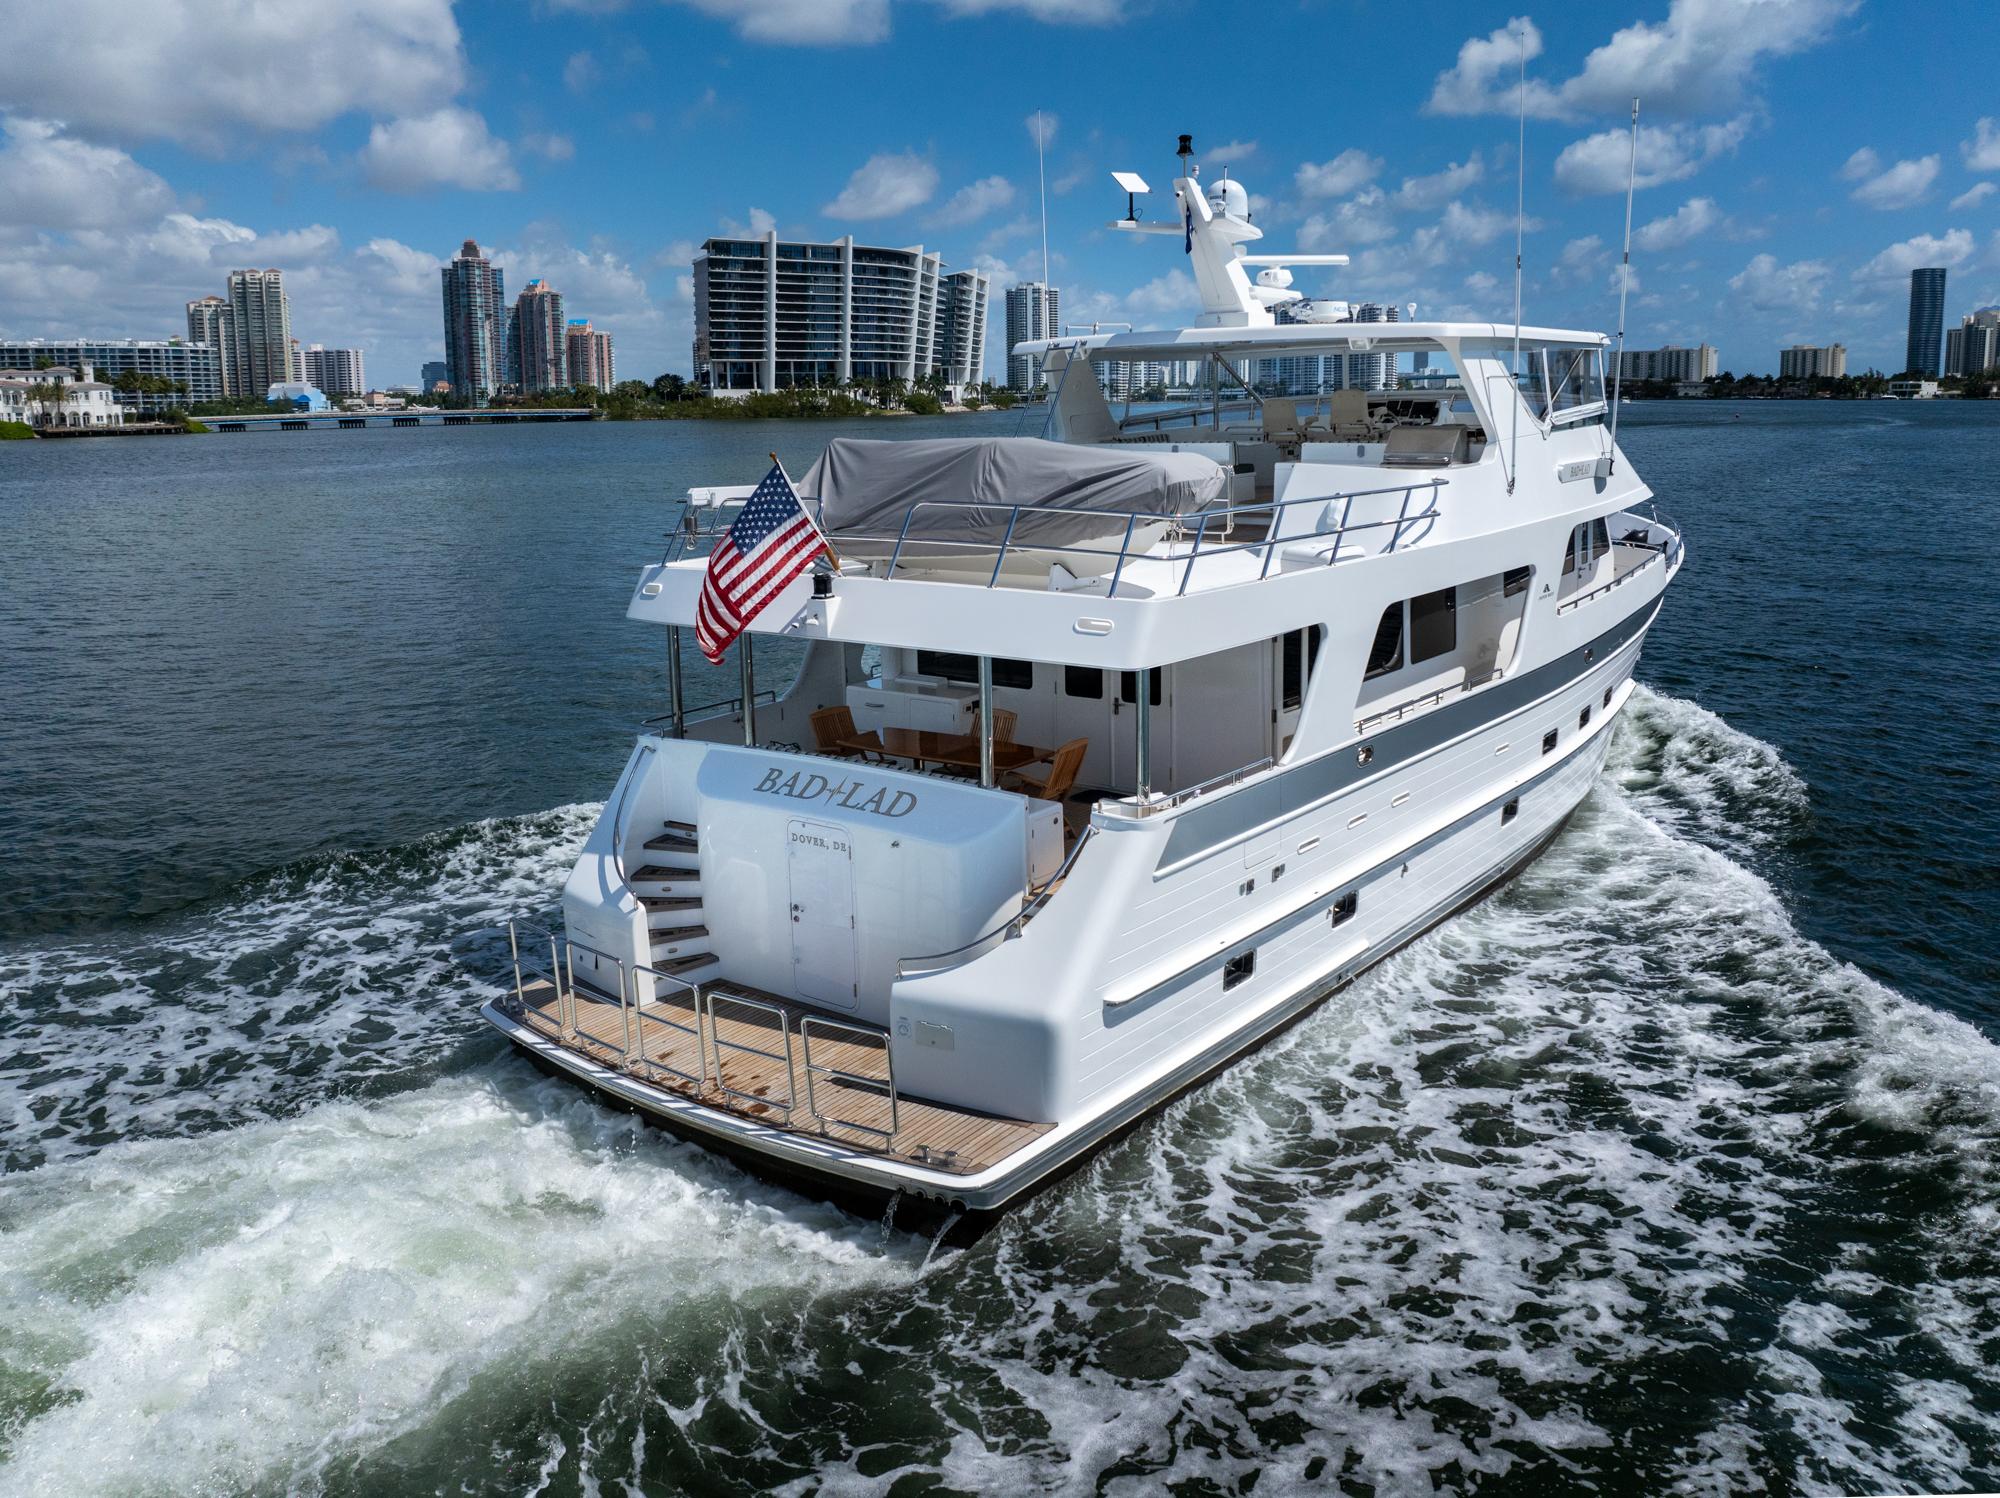 2008 Outer Reef Yachts 730 Motor Yacht